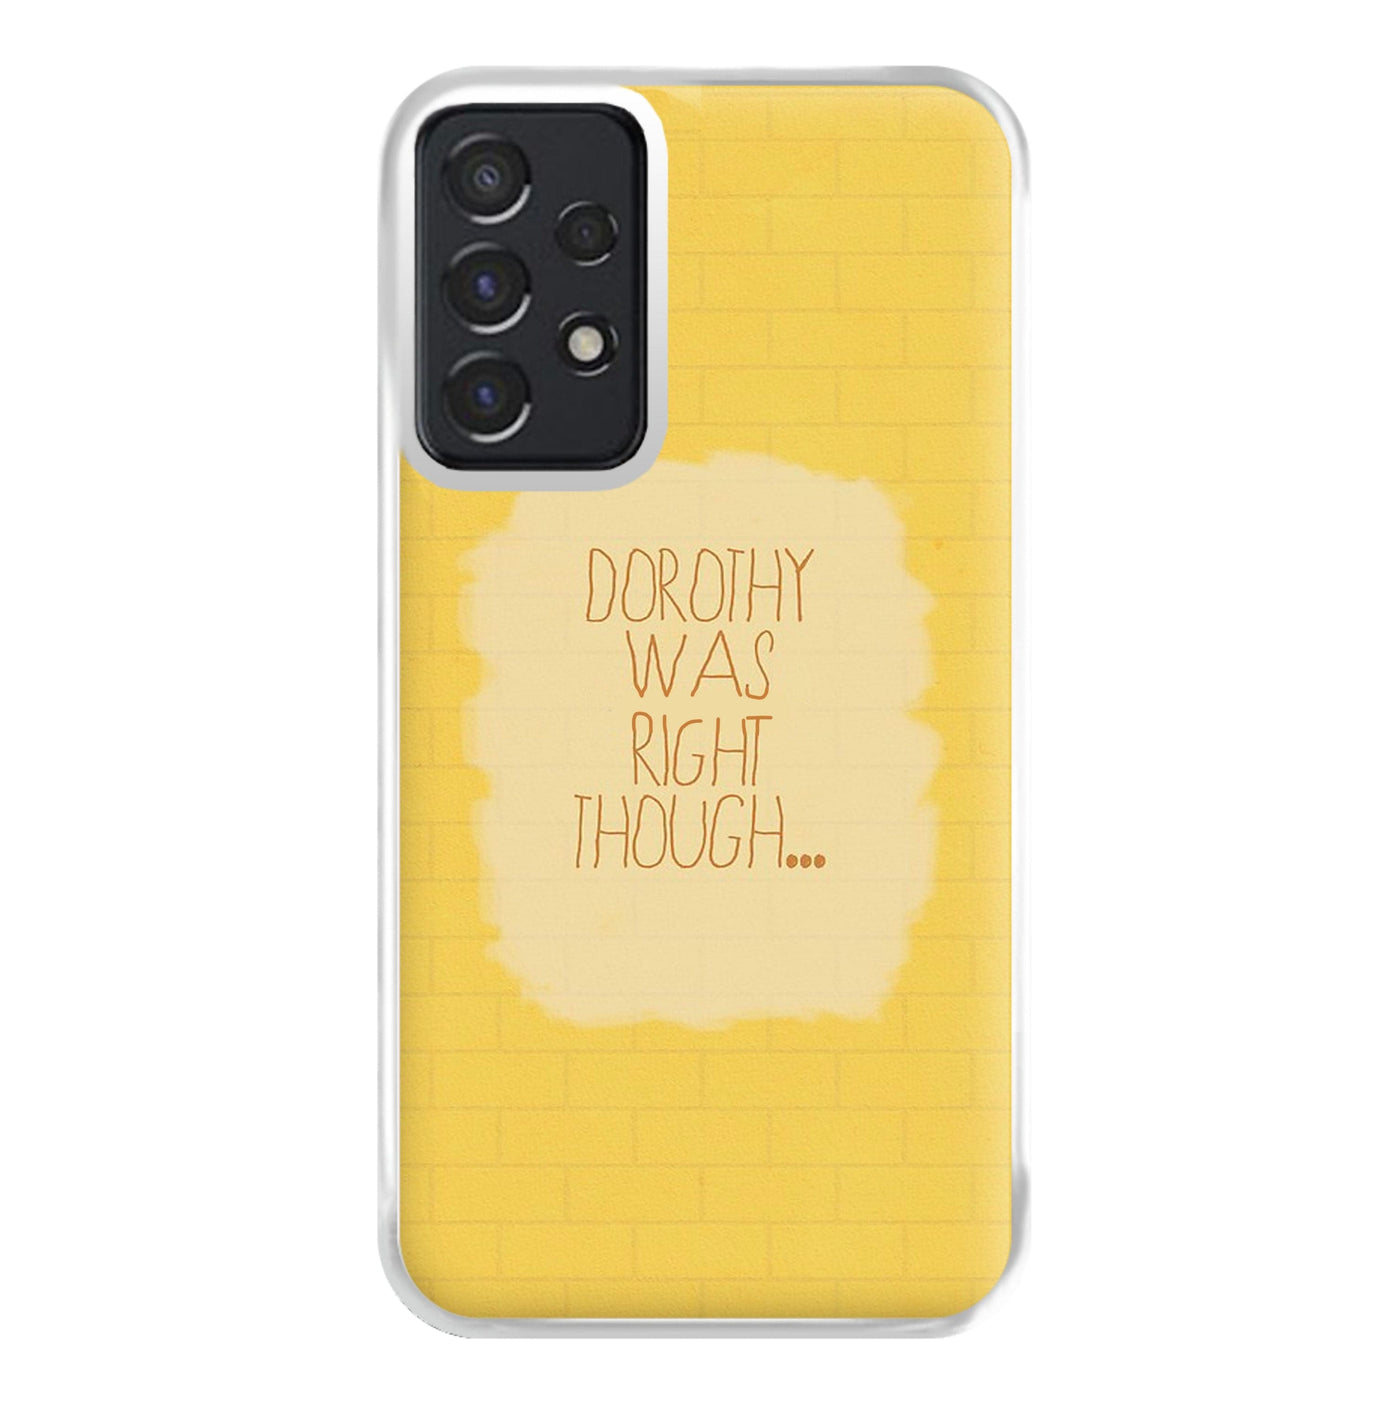 But Dorothy Was Right Though - Arctic Monkeys Phone Case